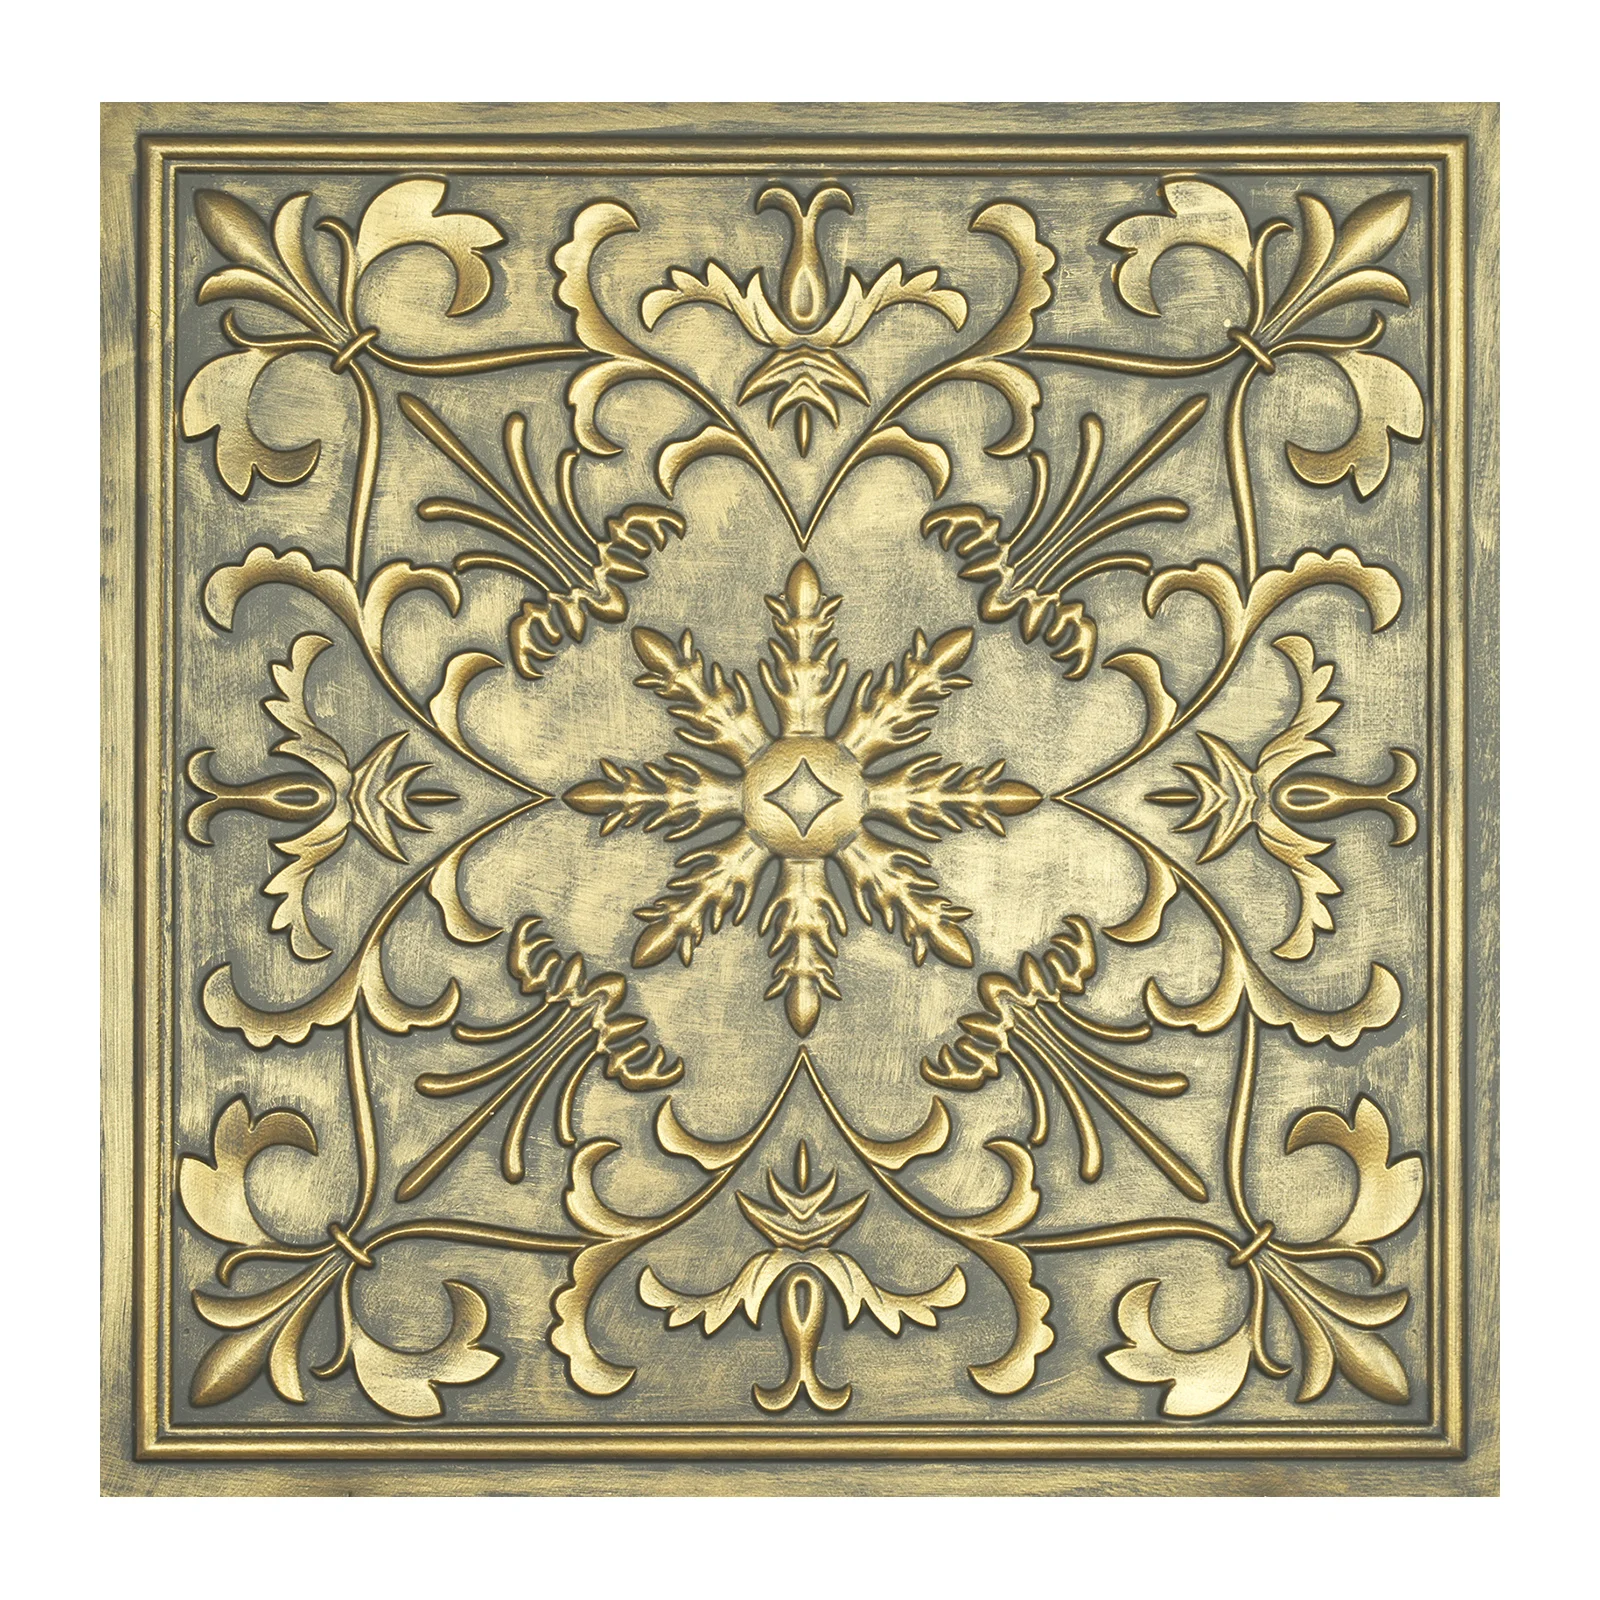 Faux finish distressed Wainscoting ceiling tiles Easy to Install PVC Panels wall decor for Public house PL70 Ancient gold